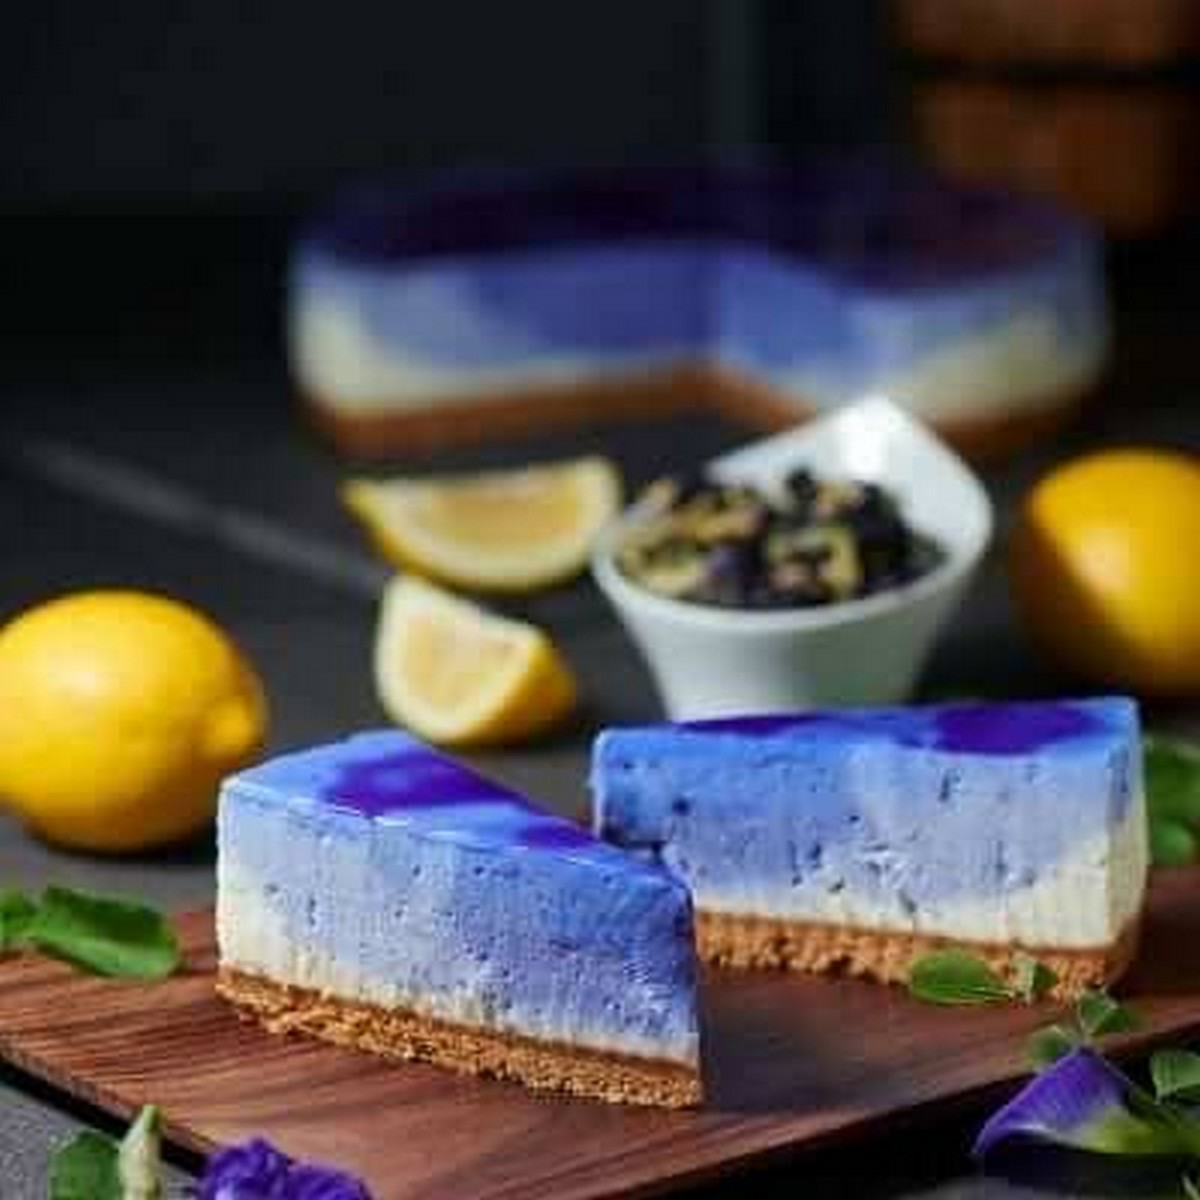 8.-Butterfly-Pea-Lemon-Cheese - LifeStyle 